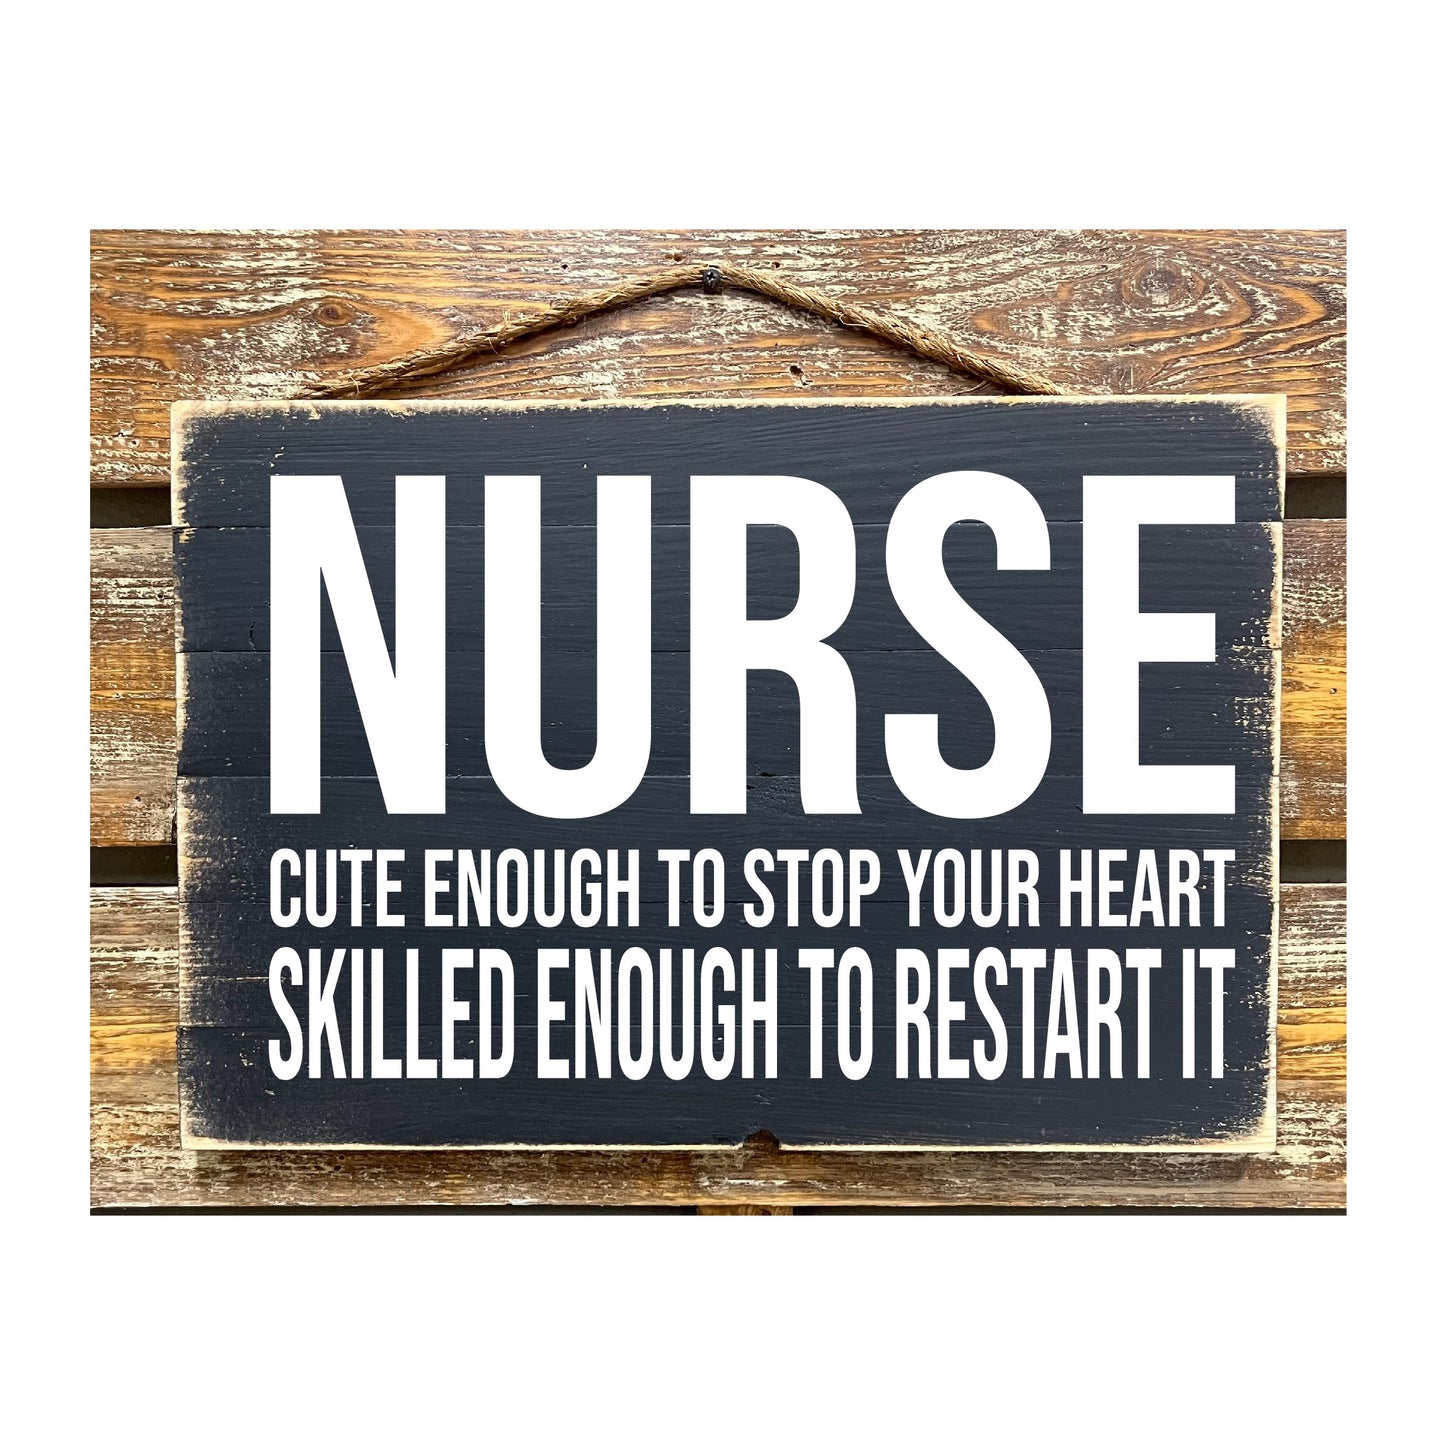 Nurse Cute Enough To Stop Your Heart Skilled Enough To Restart It